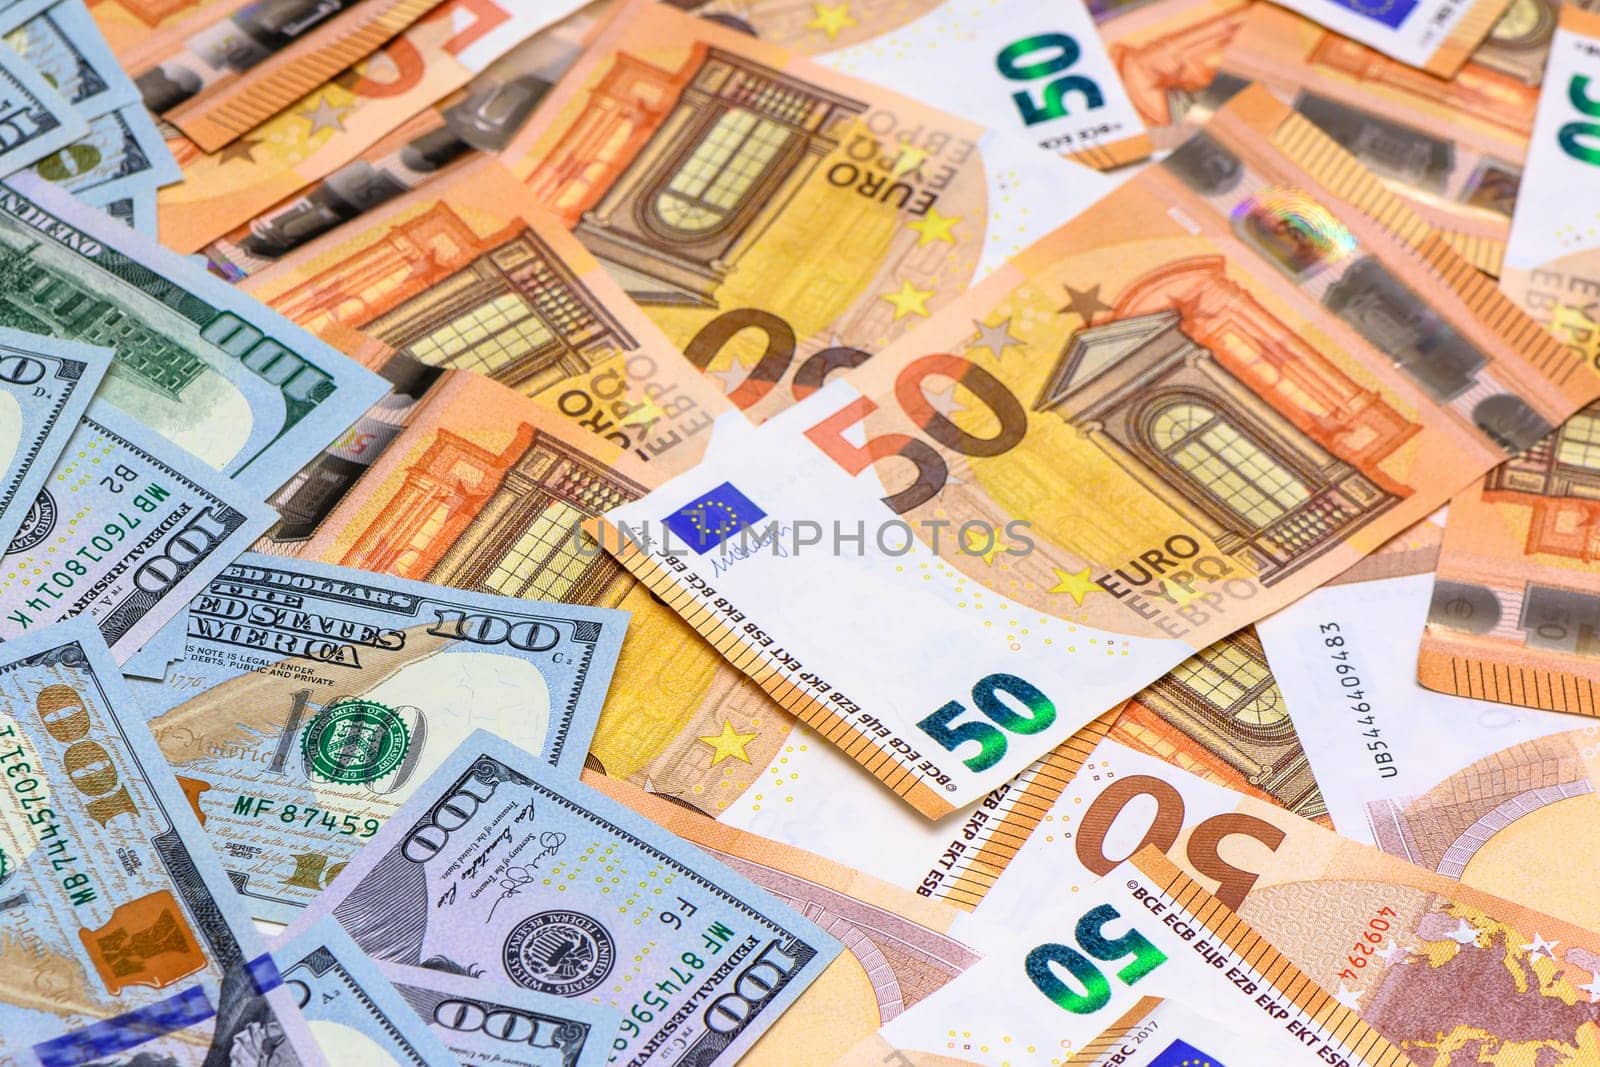 Banknotes of 100 dollars and 50 euros laid out on the table by Mixa74